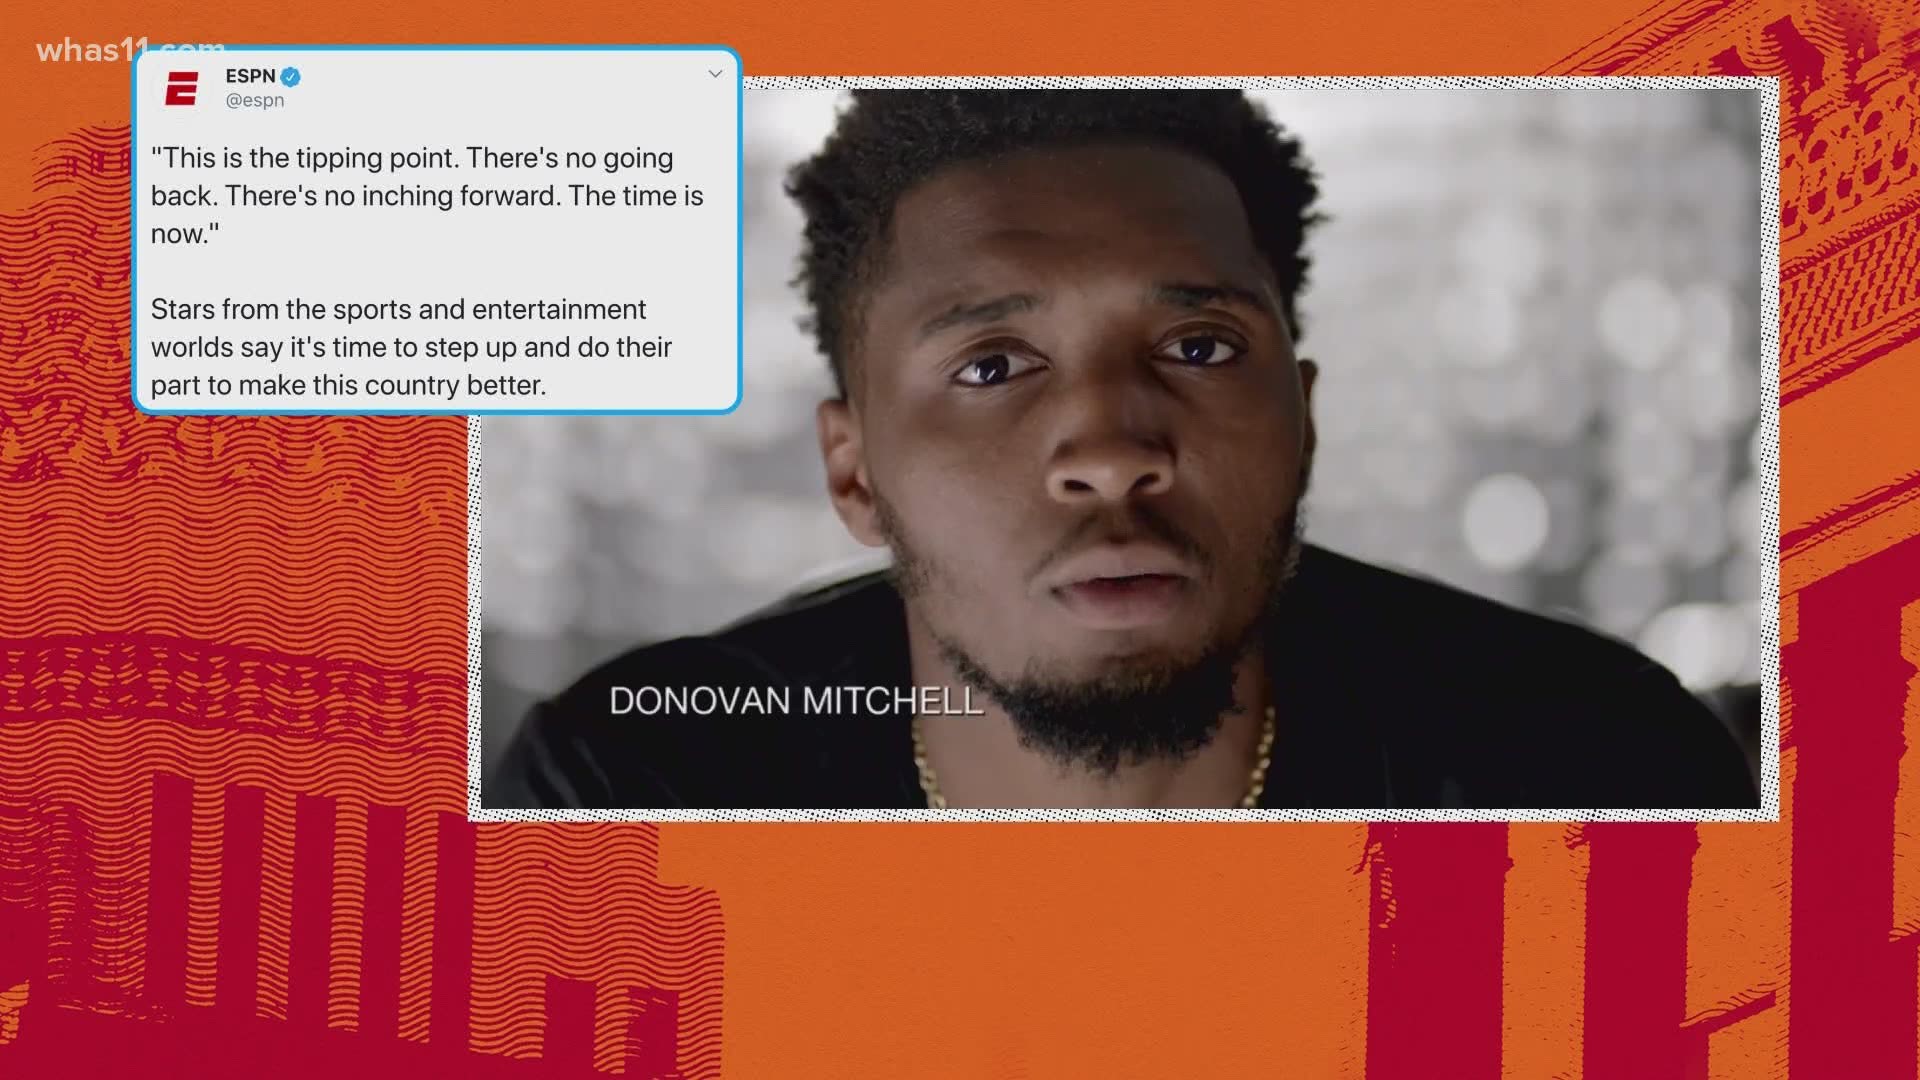 Former Cardinal Donovan Mitchell joined a video calling for action after Black Americans, including Breonna Taylor, have been killed.